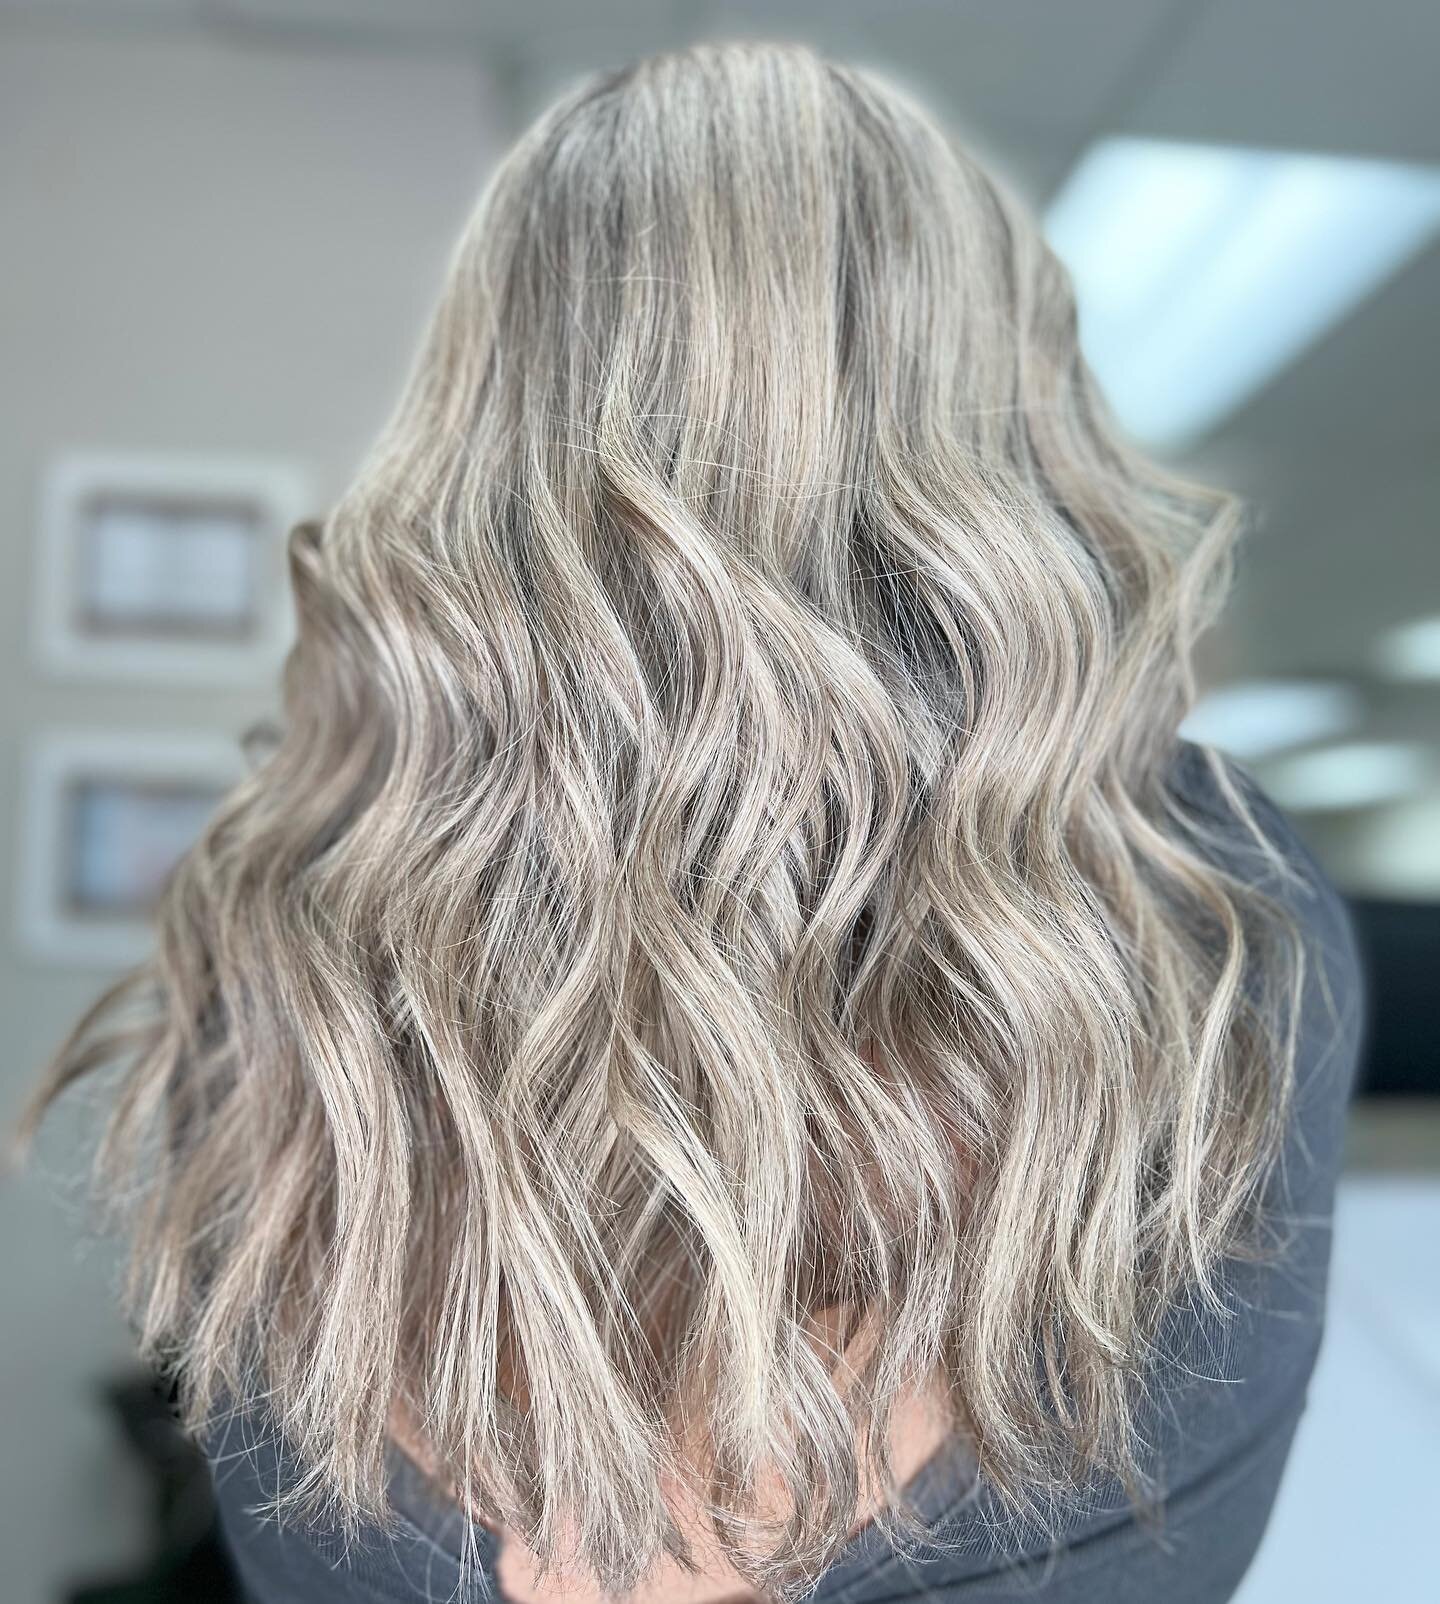 You can&rsquo;t get much blonder than this🤩

Marissa&rsquo;s client achieved all hair goals after several sessions of full head highlights &amp; toning ✨

#platinumblonde #fullhighlight #lowlights #redkenshadeseq #amikahairproducts #olaplex